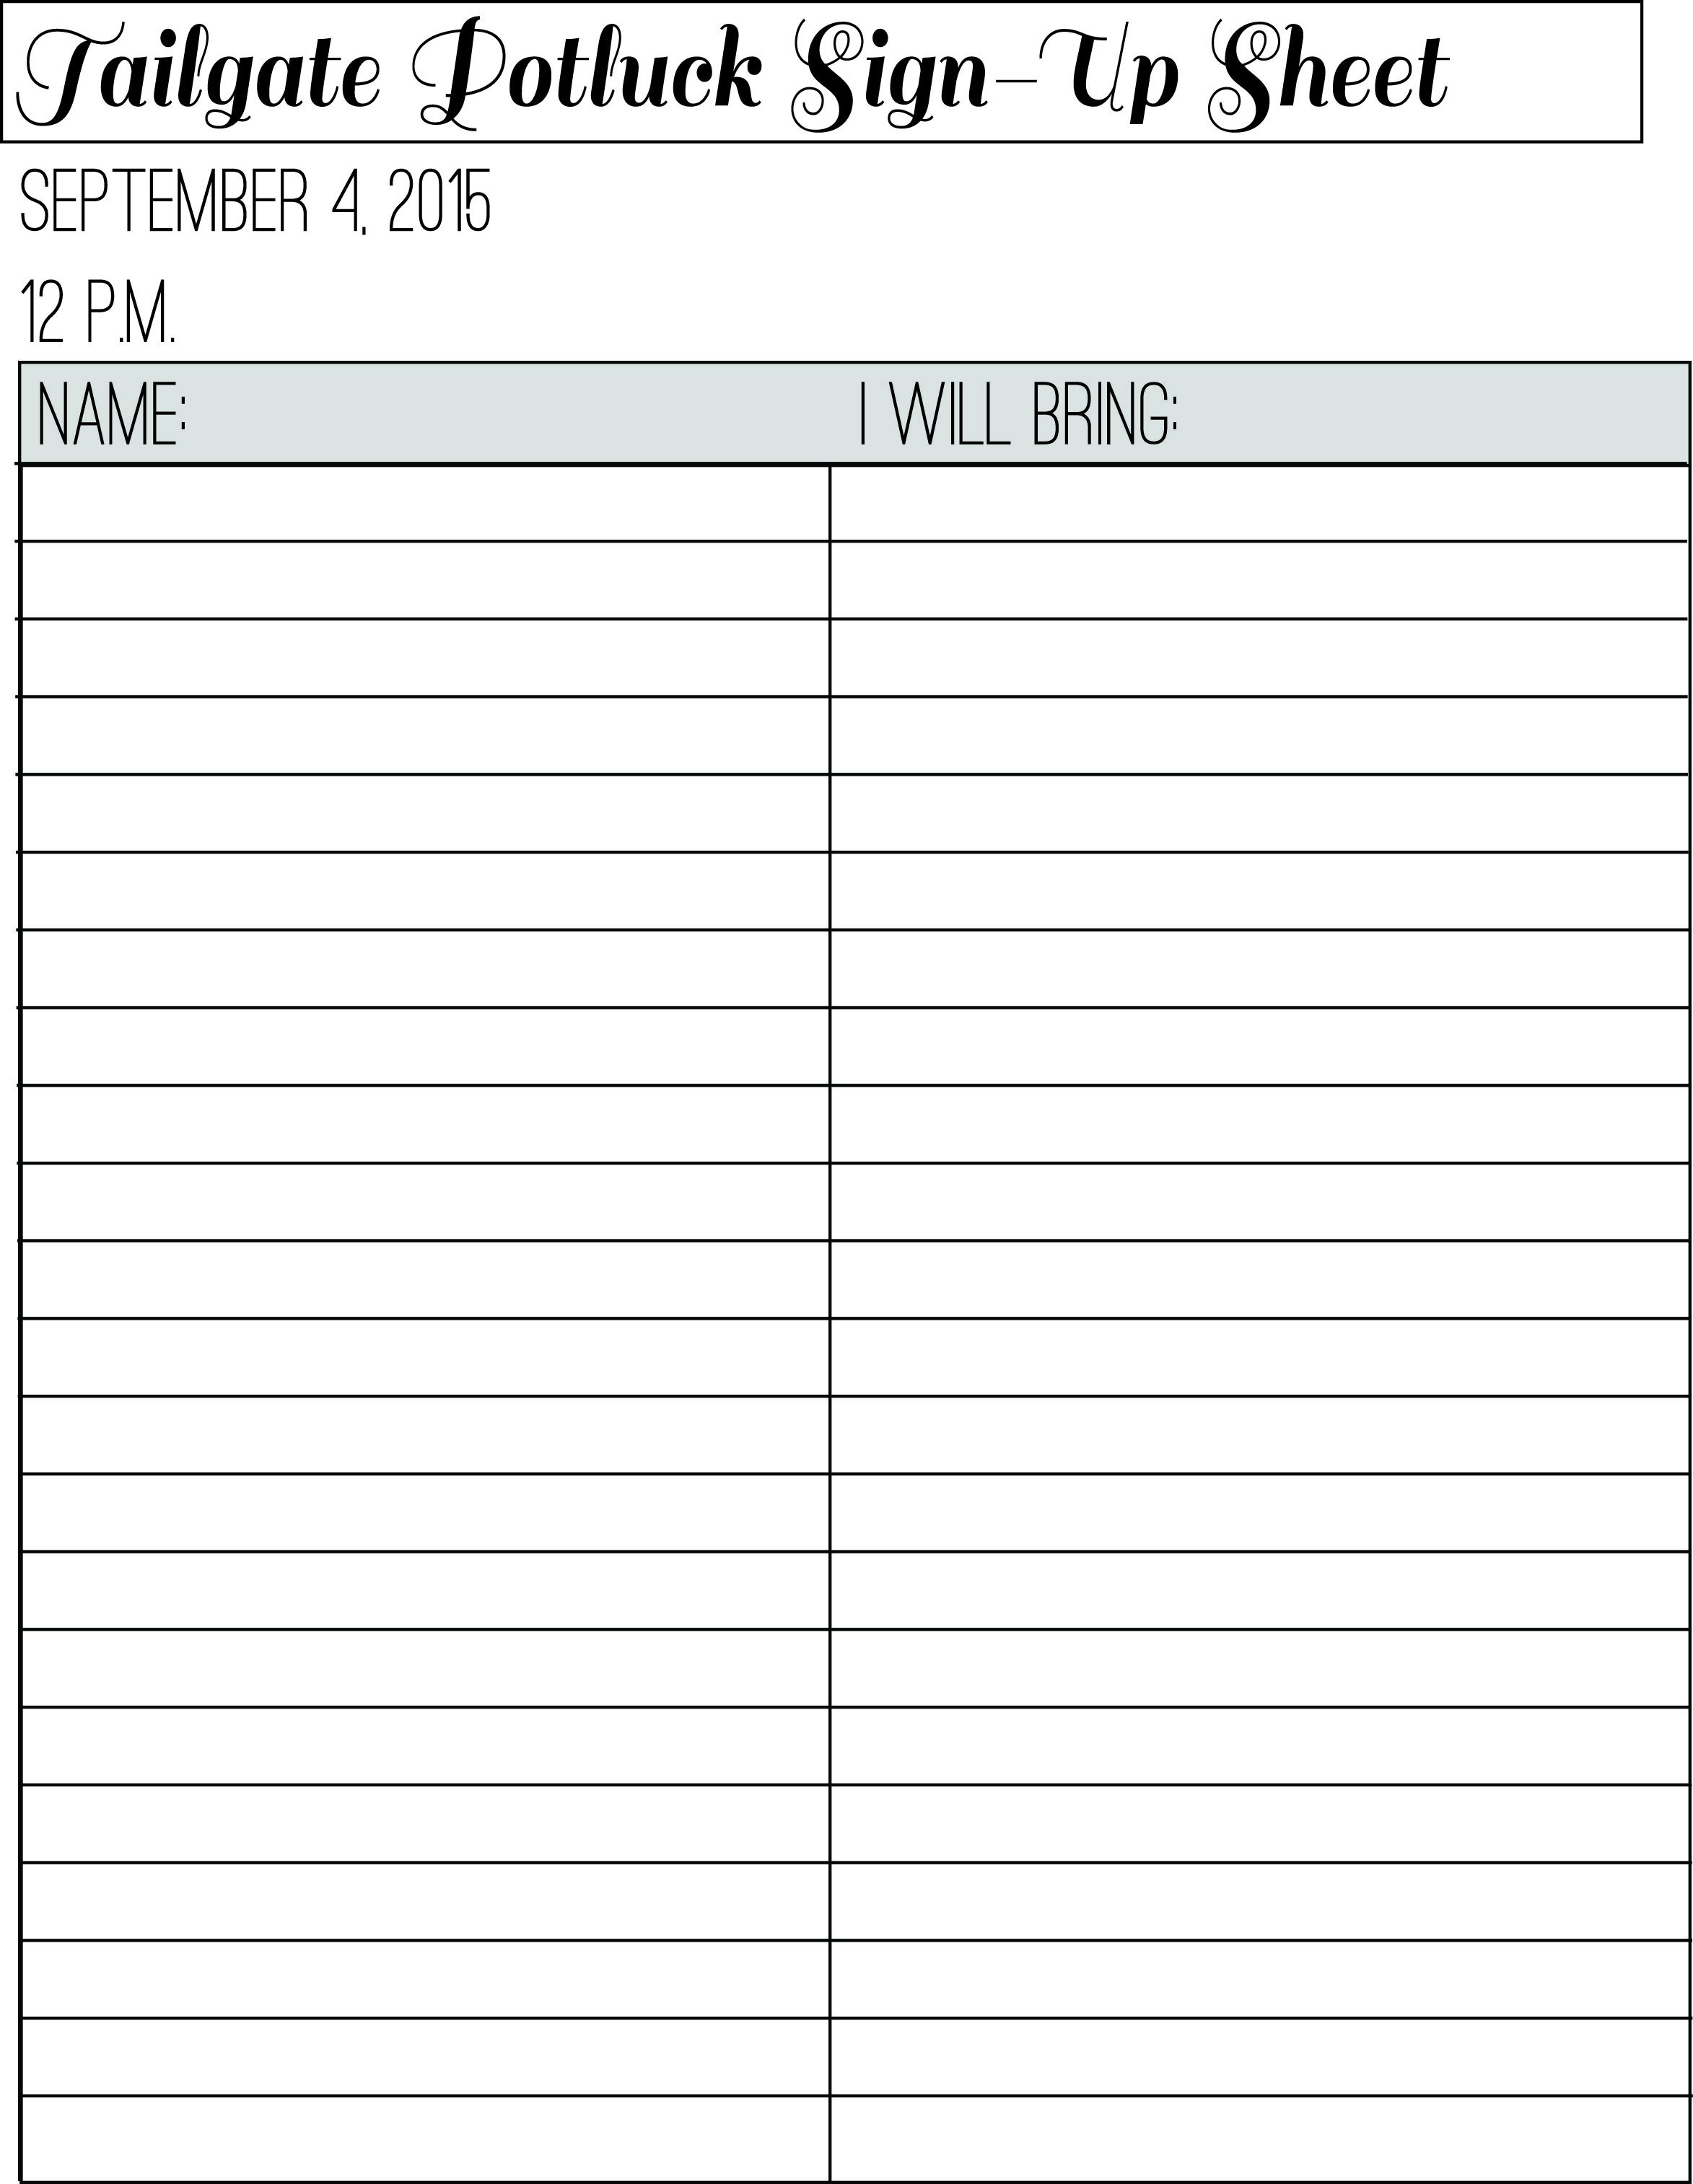 The Sign Up Sheet For Our Tailgate Potluck. | Valentine&amp;#039;s Day - Free Printable Sign Up Sheets For Potlucks